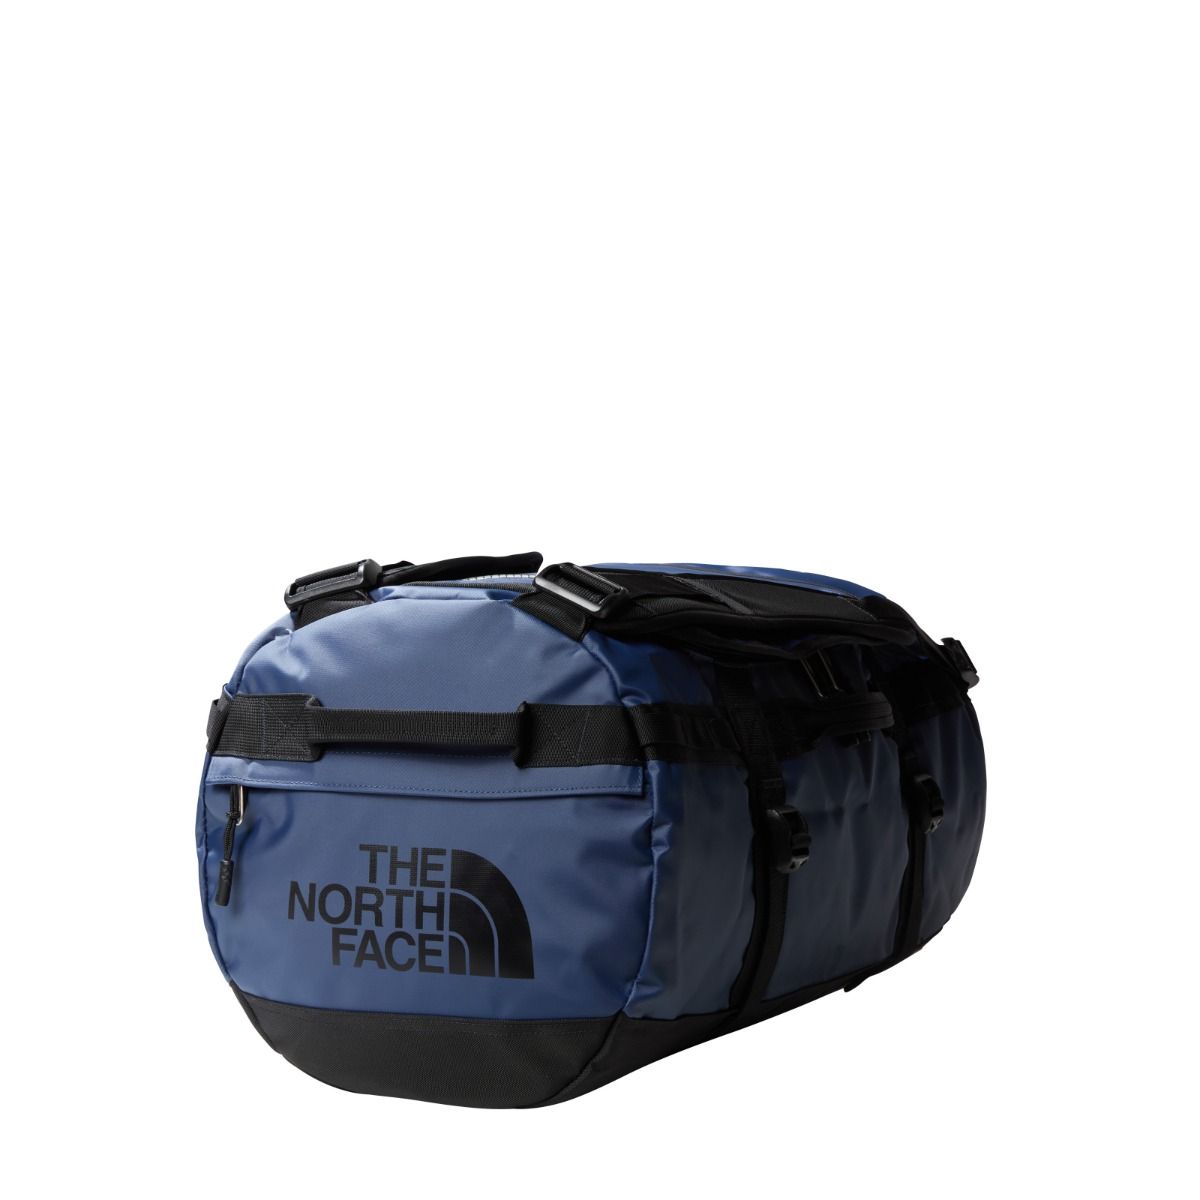 The North Face - BASE CAMP DUFFEL SMALL 50L